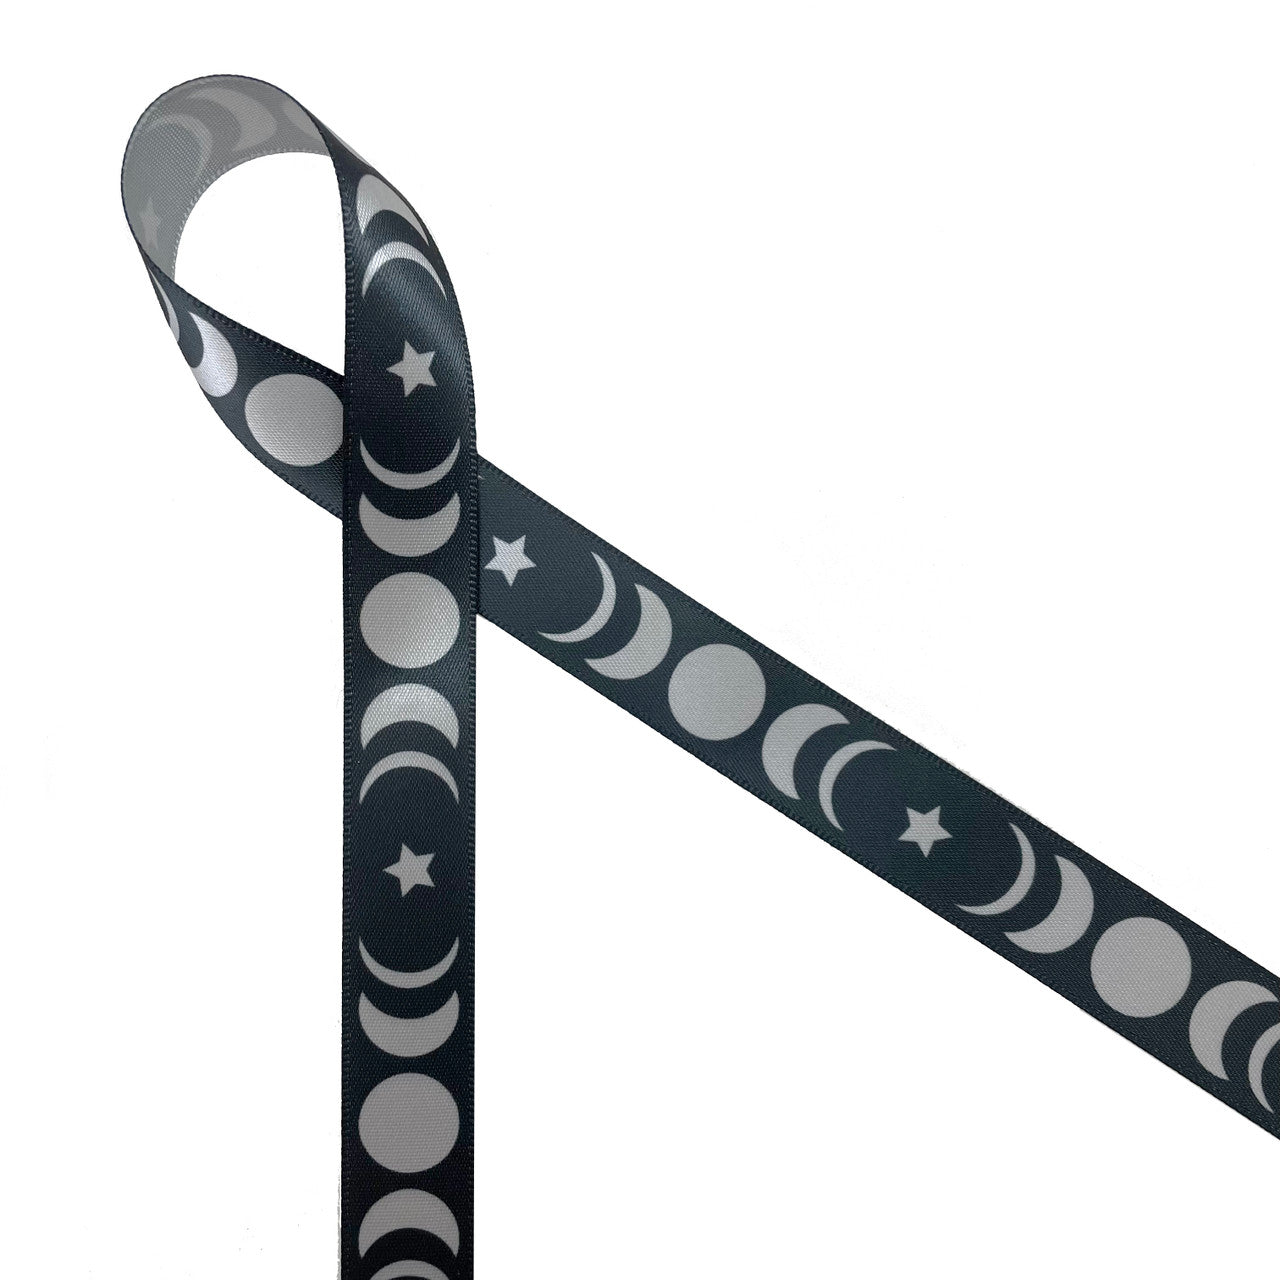 Moon ribbon featuring moon phases in silver on a black background